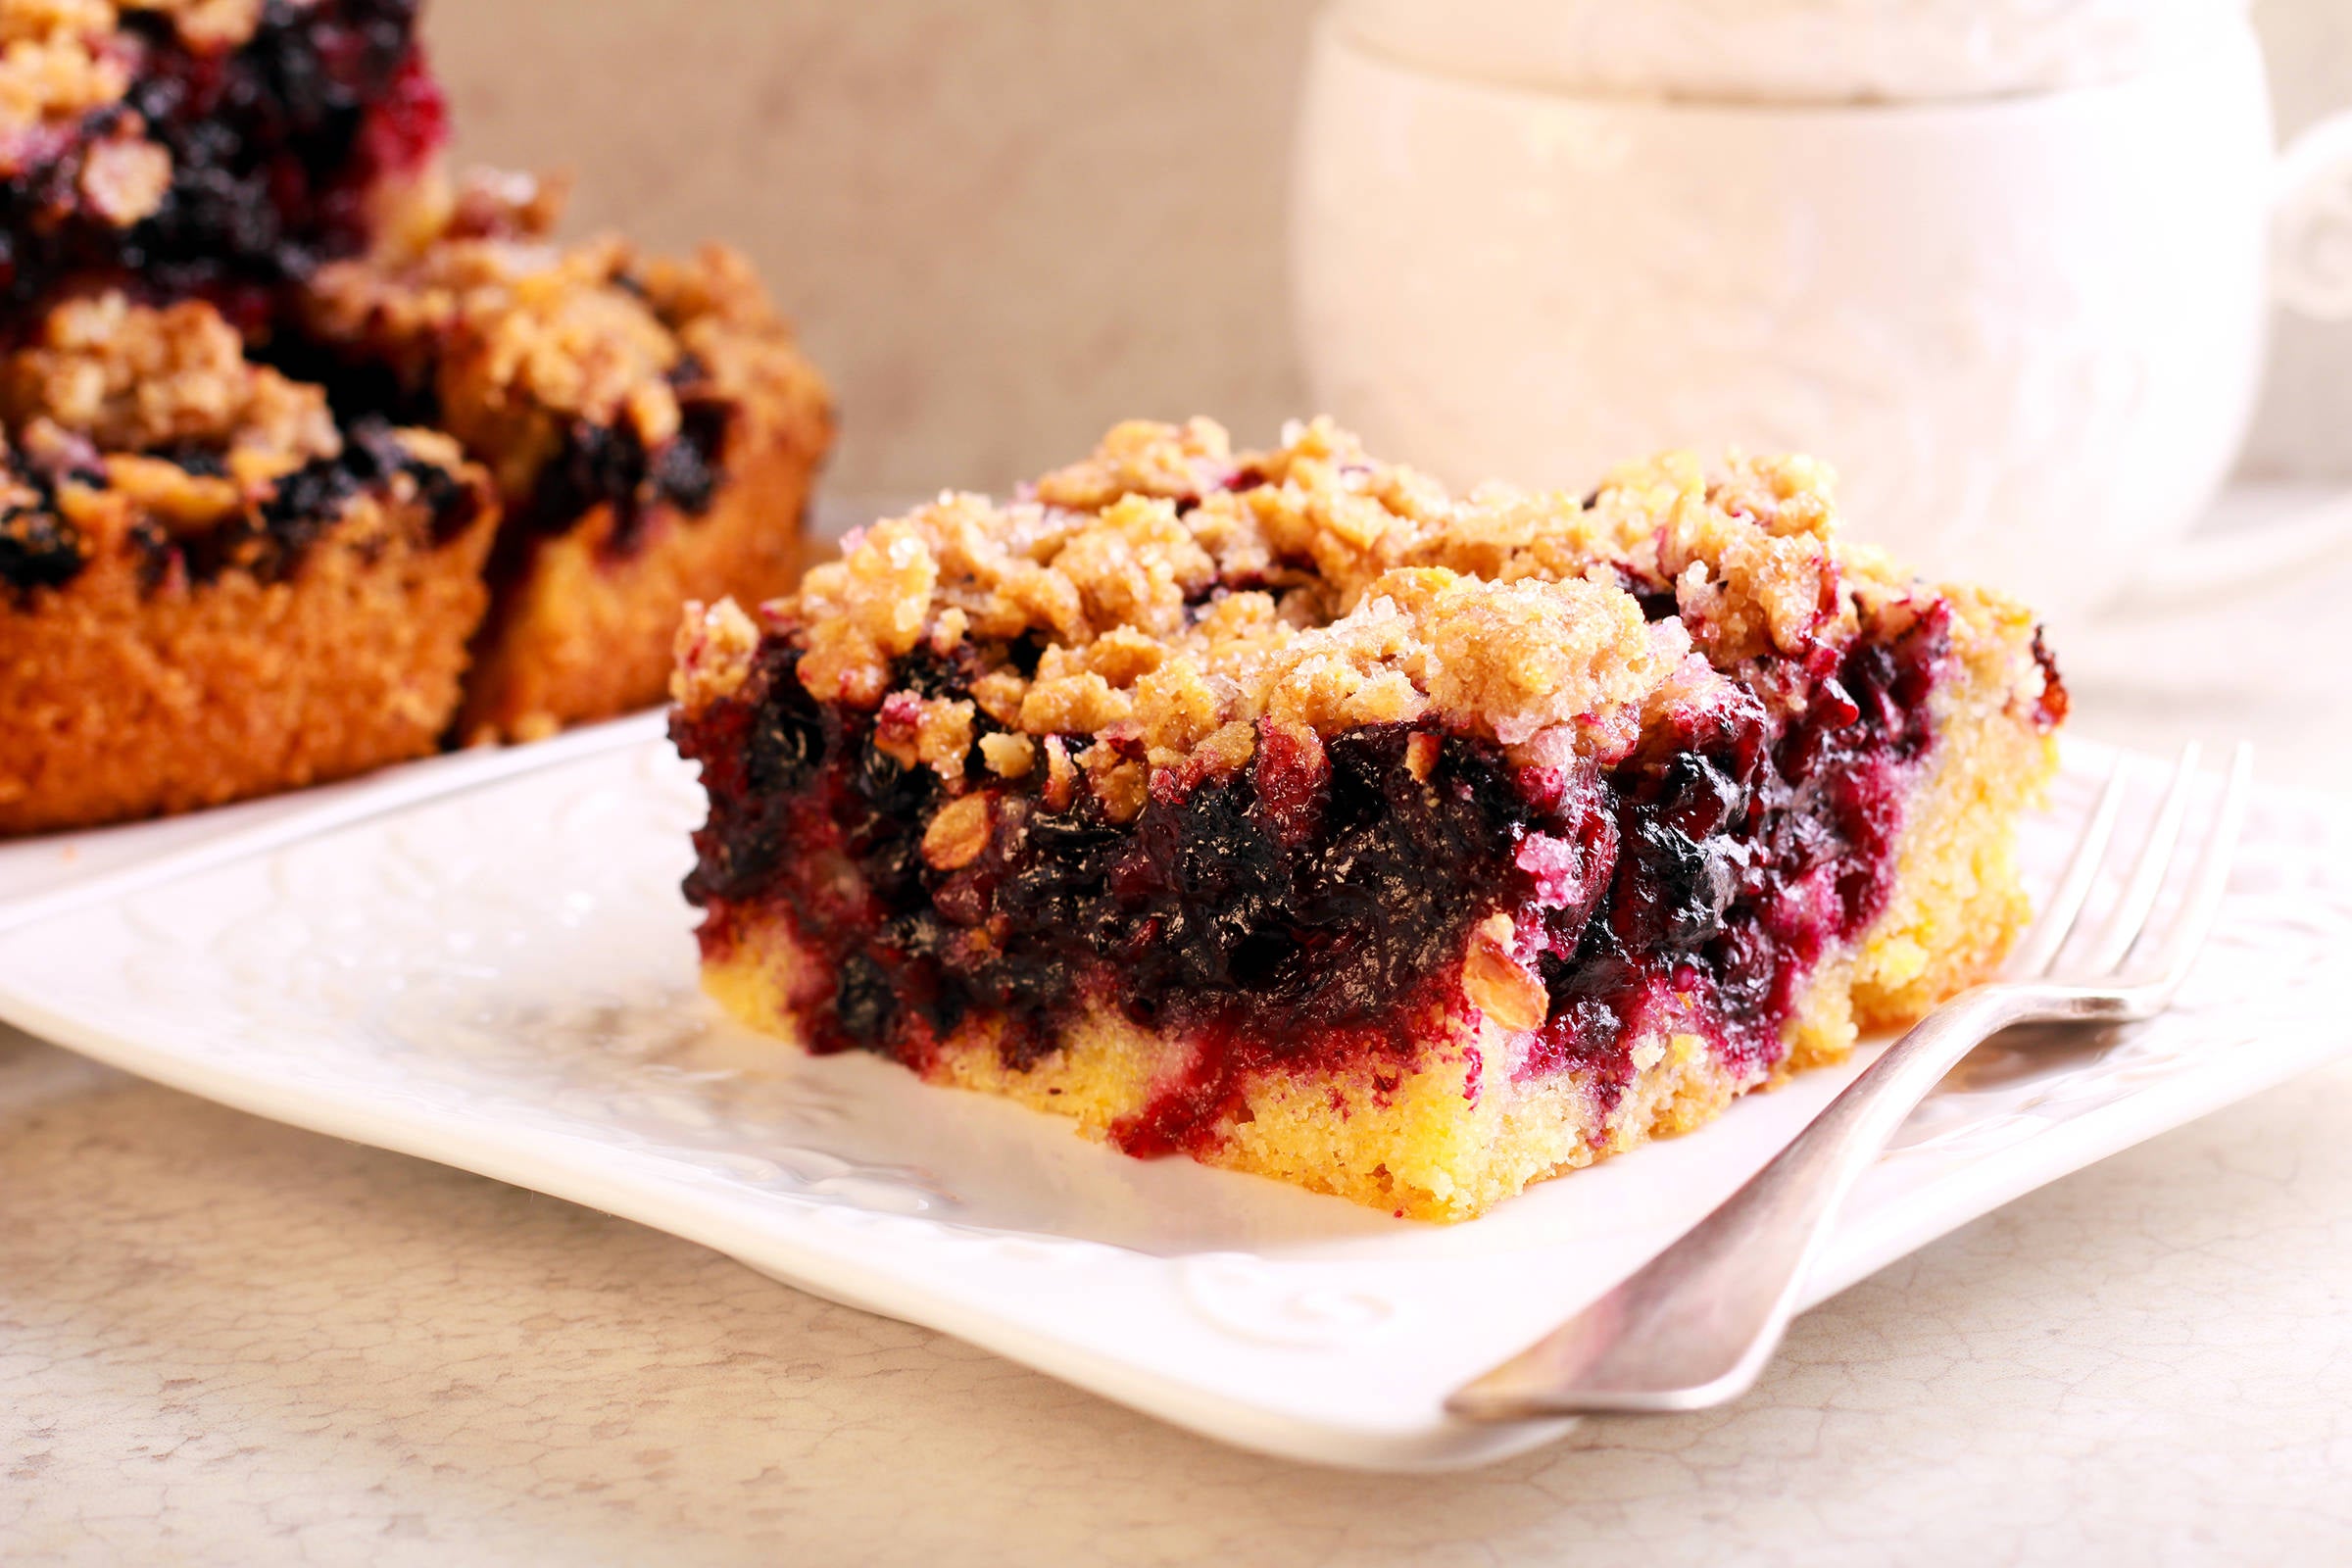 Blueberry crumble slice bar on plate